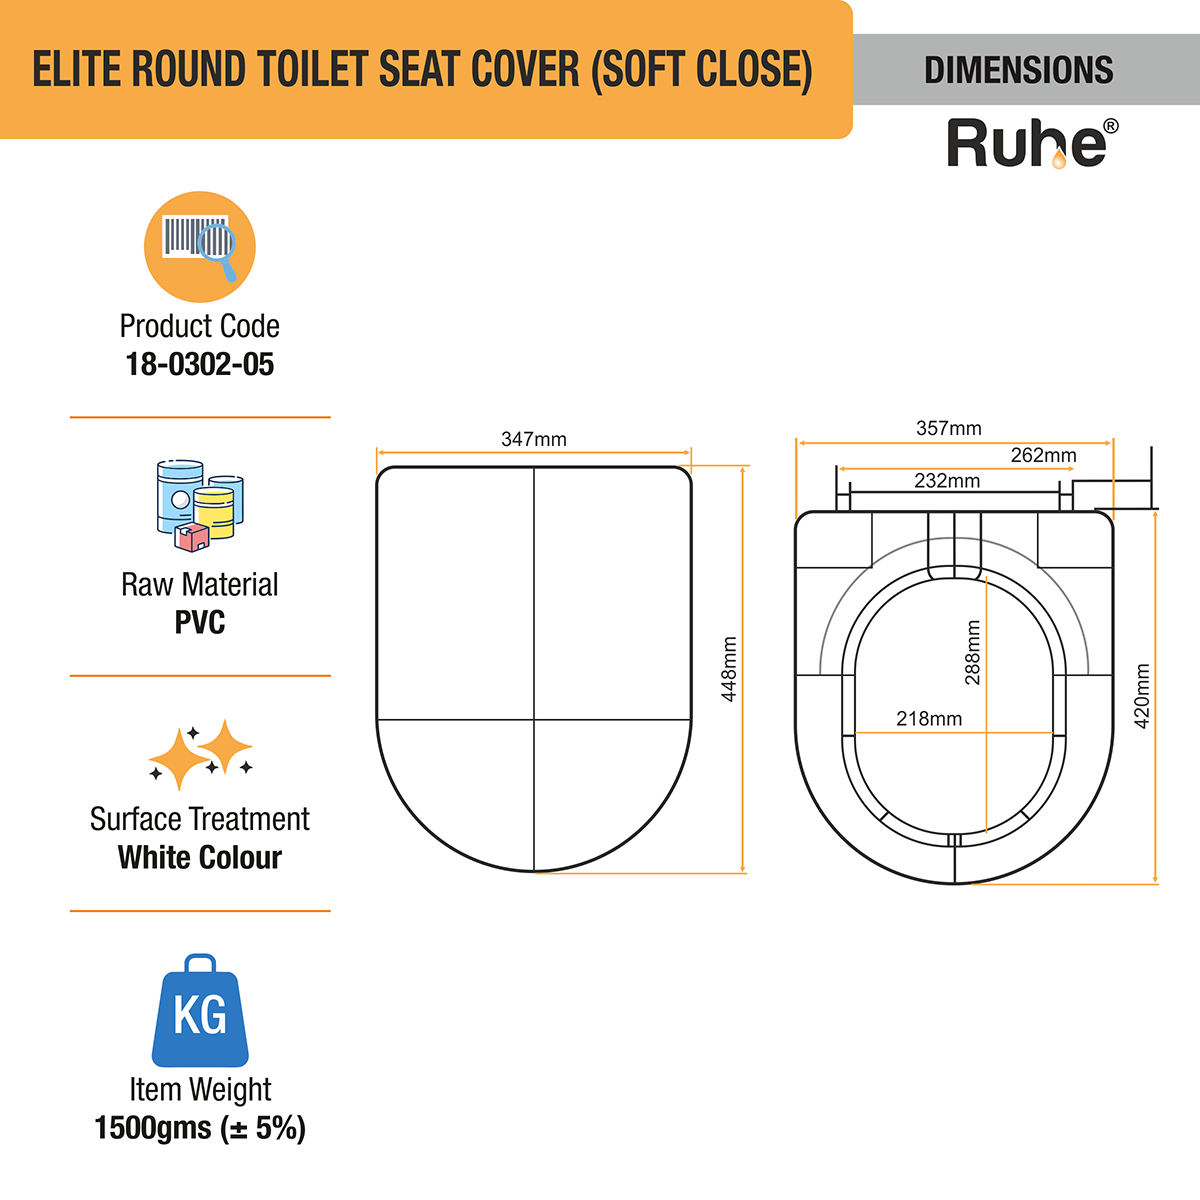 Elite Round Toilet Seat Cover (Soft Close) dimensions and sizes